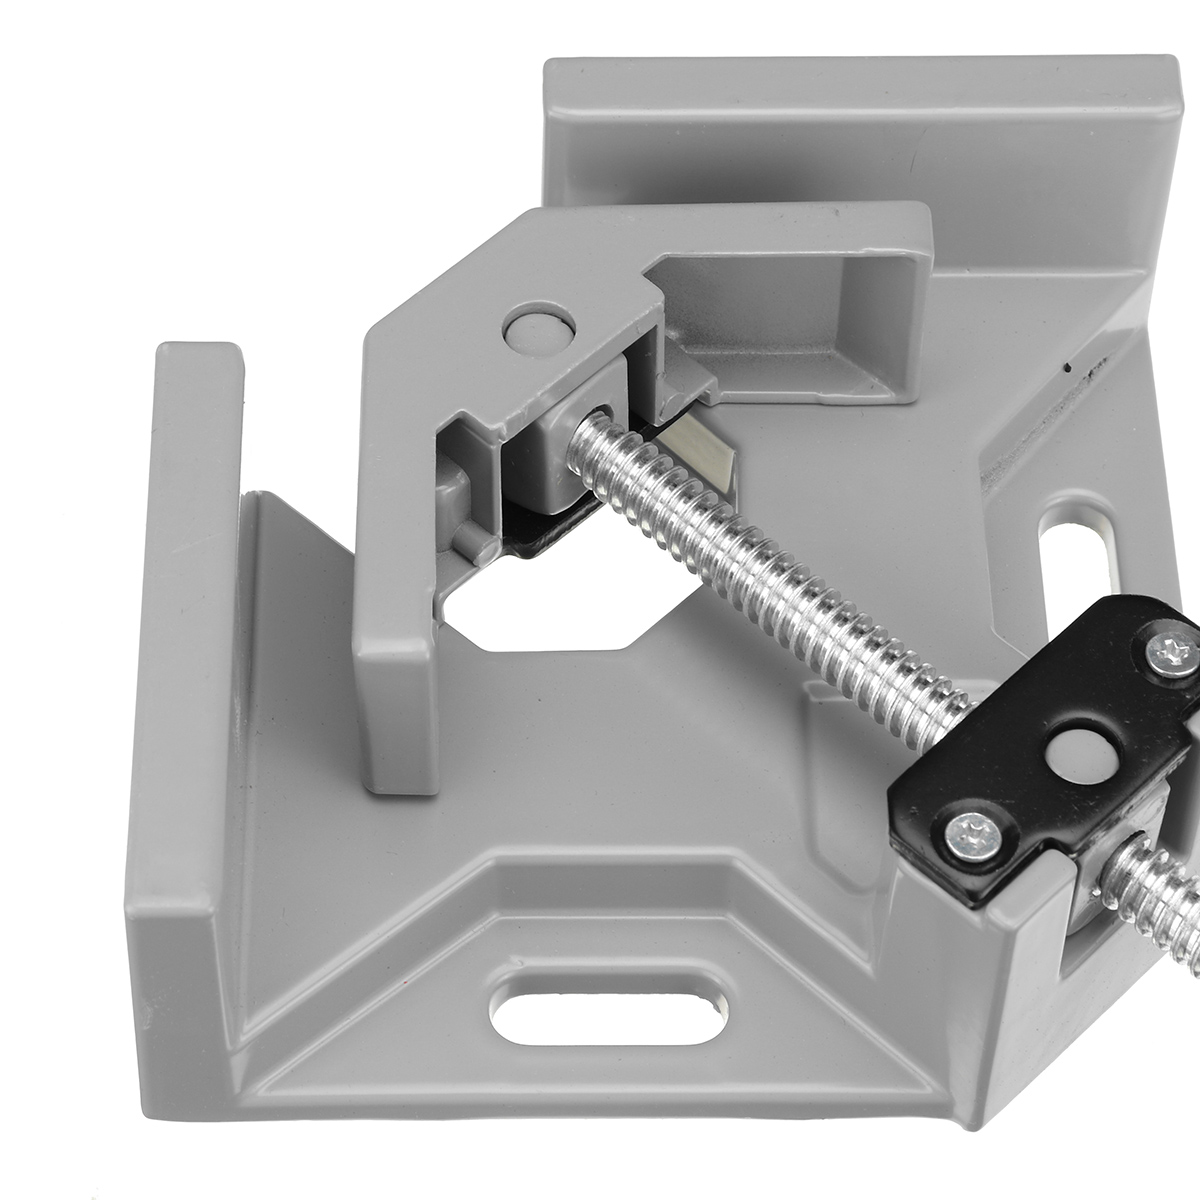 90-Degree-Quick-Release-Corner-Clamp-Right-Angle-Welding-Woodworking-Photo-Frame-Clamping-Tool-1768833-10